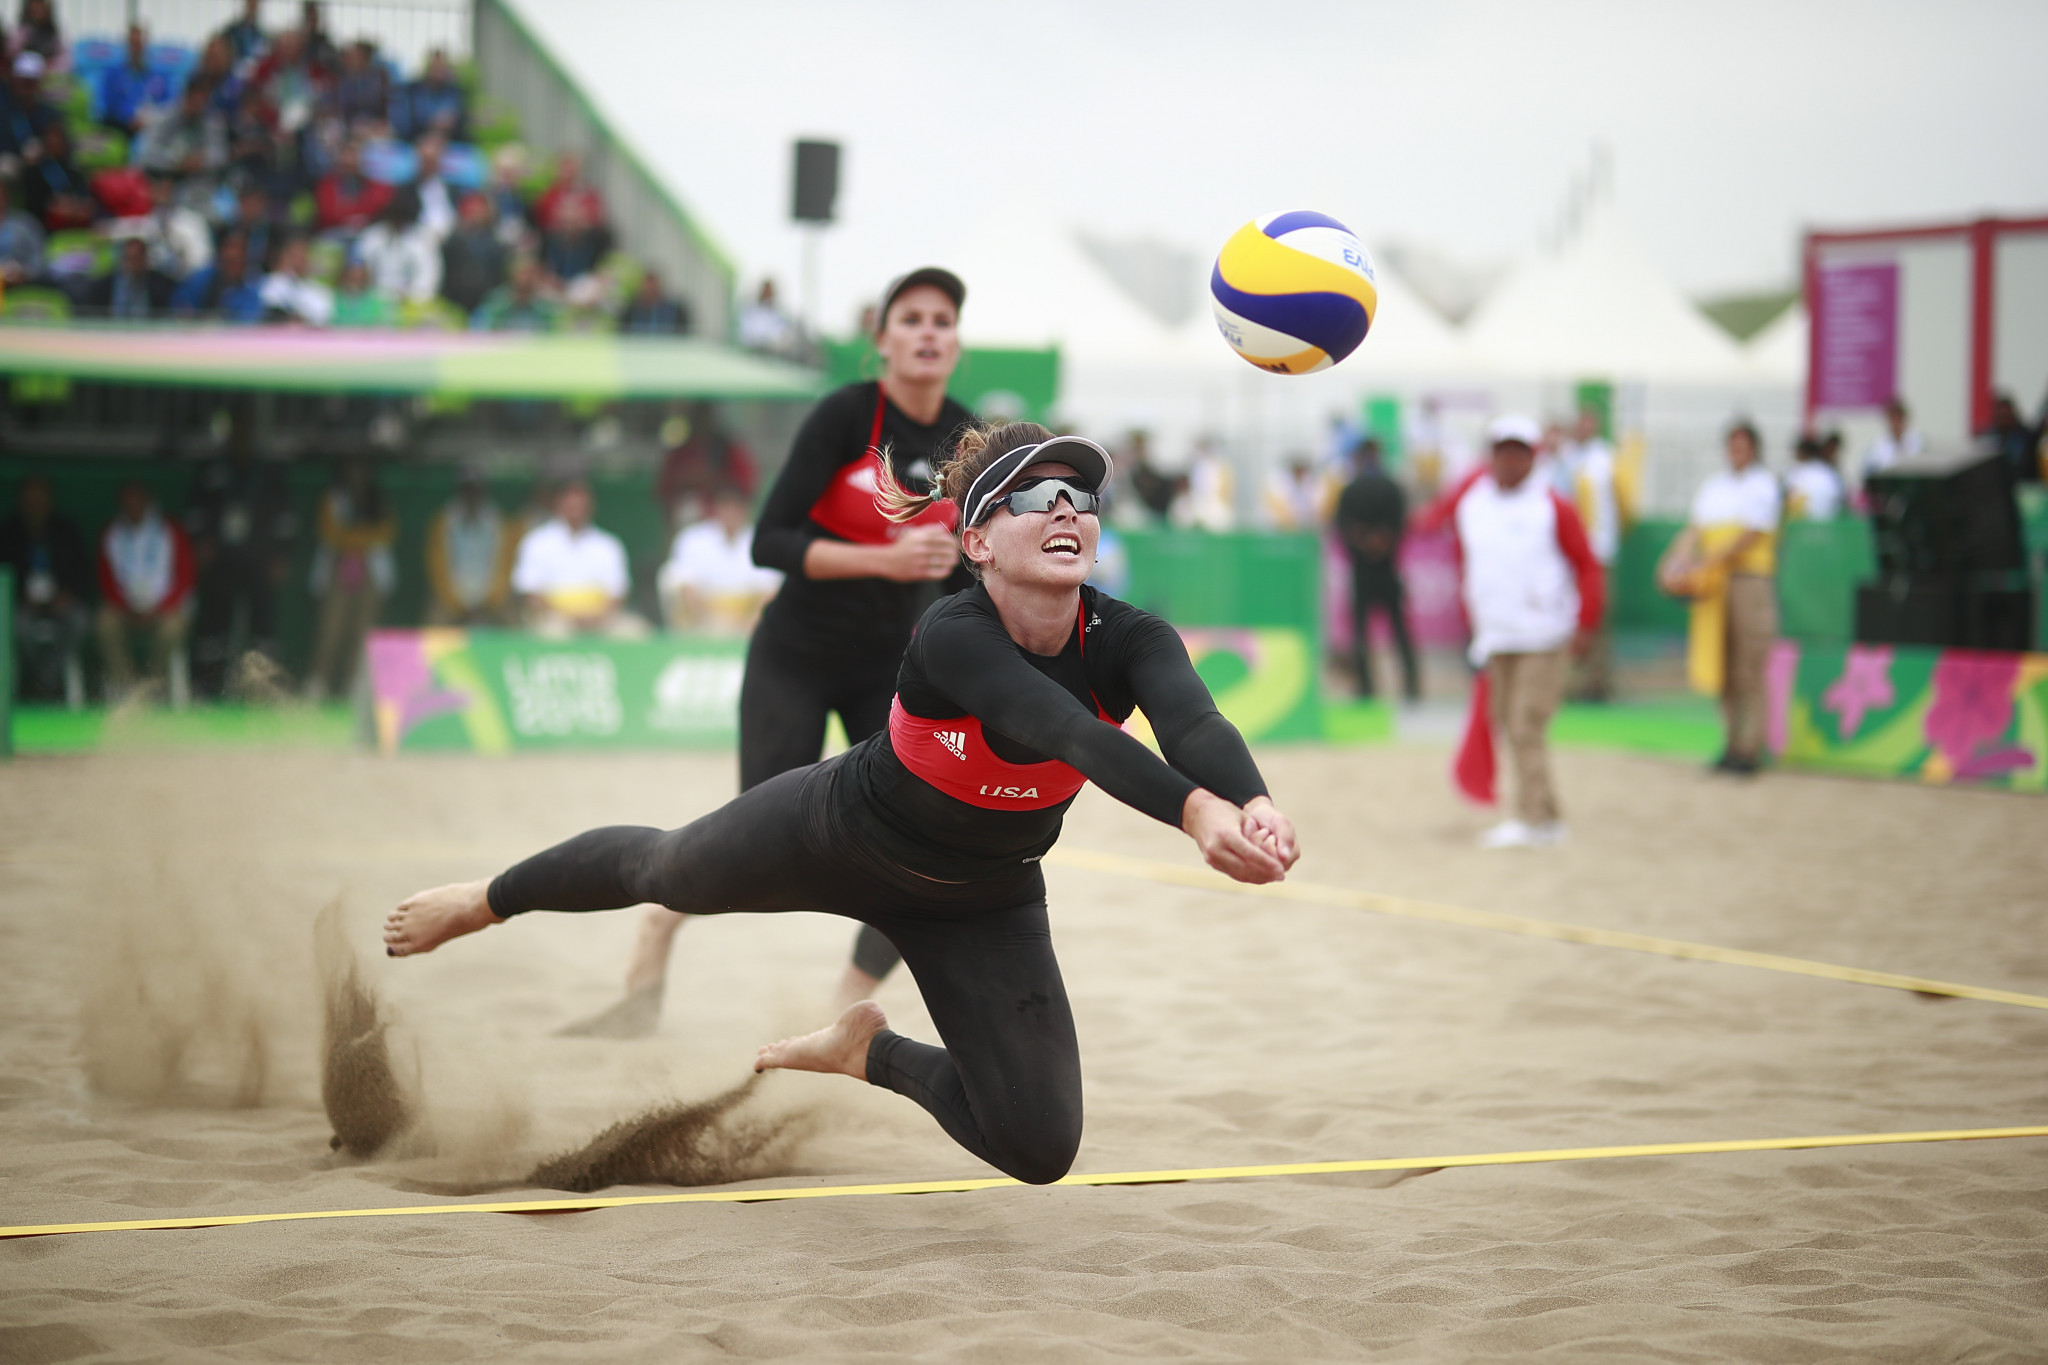 Karissa Cook and Jace Pardon of the United States won the women's beach volleyball ©Lima 2019